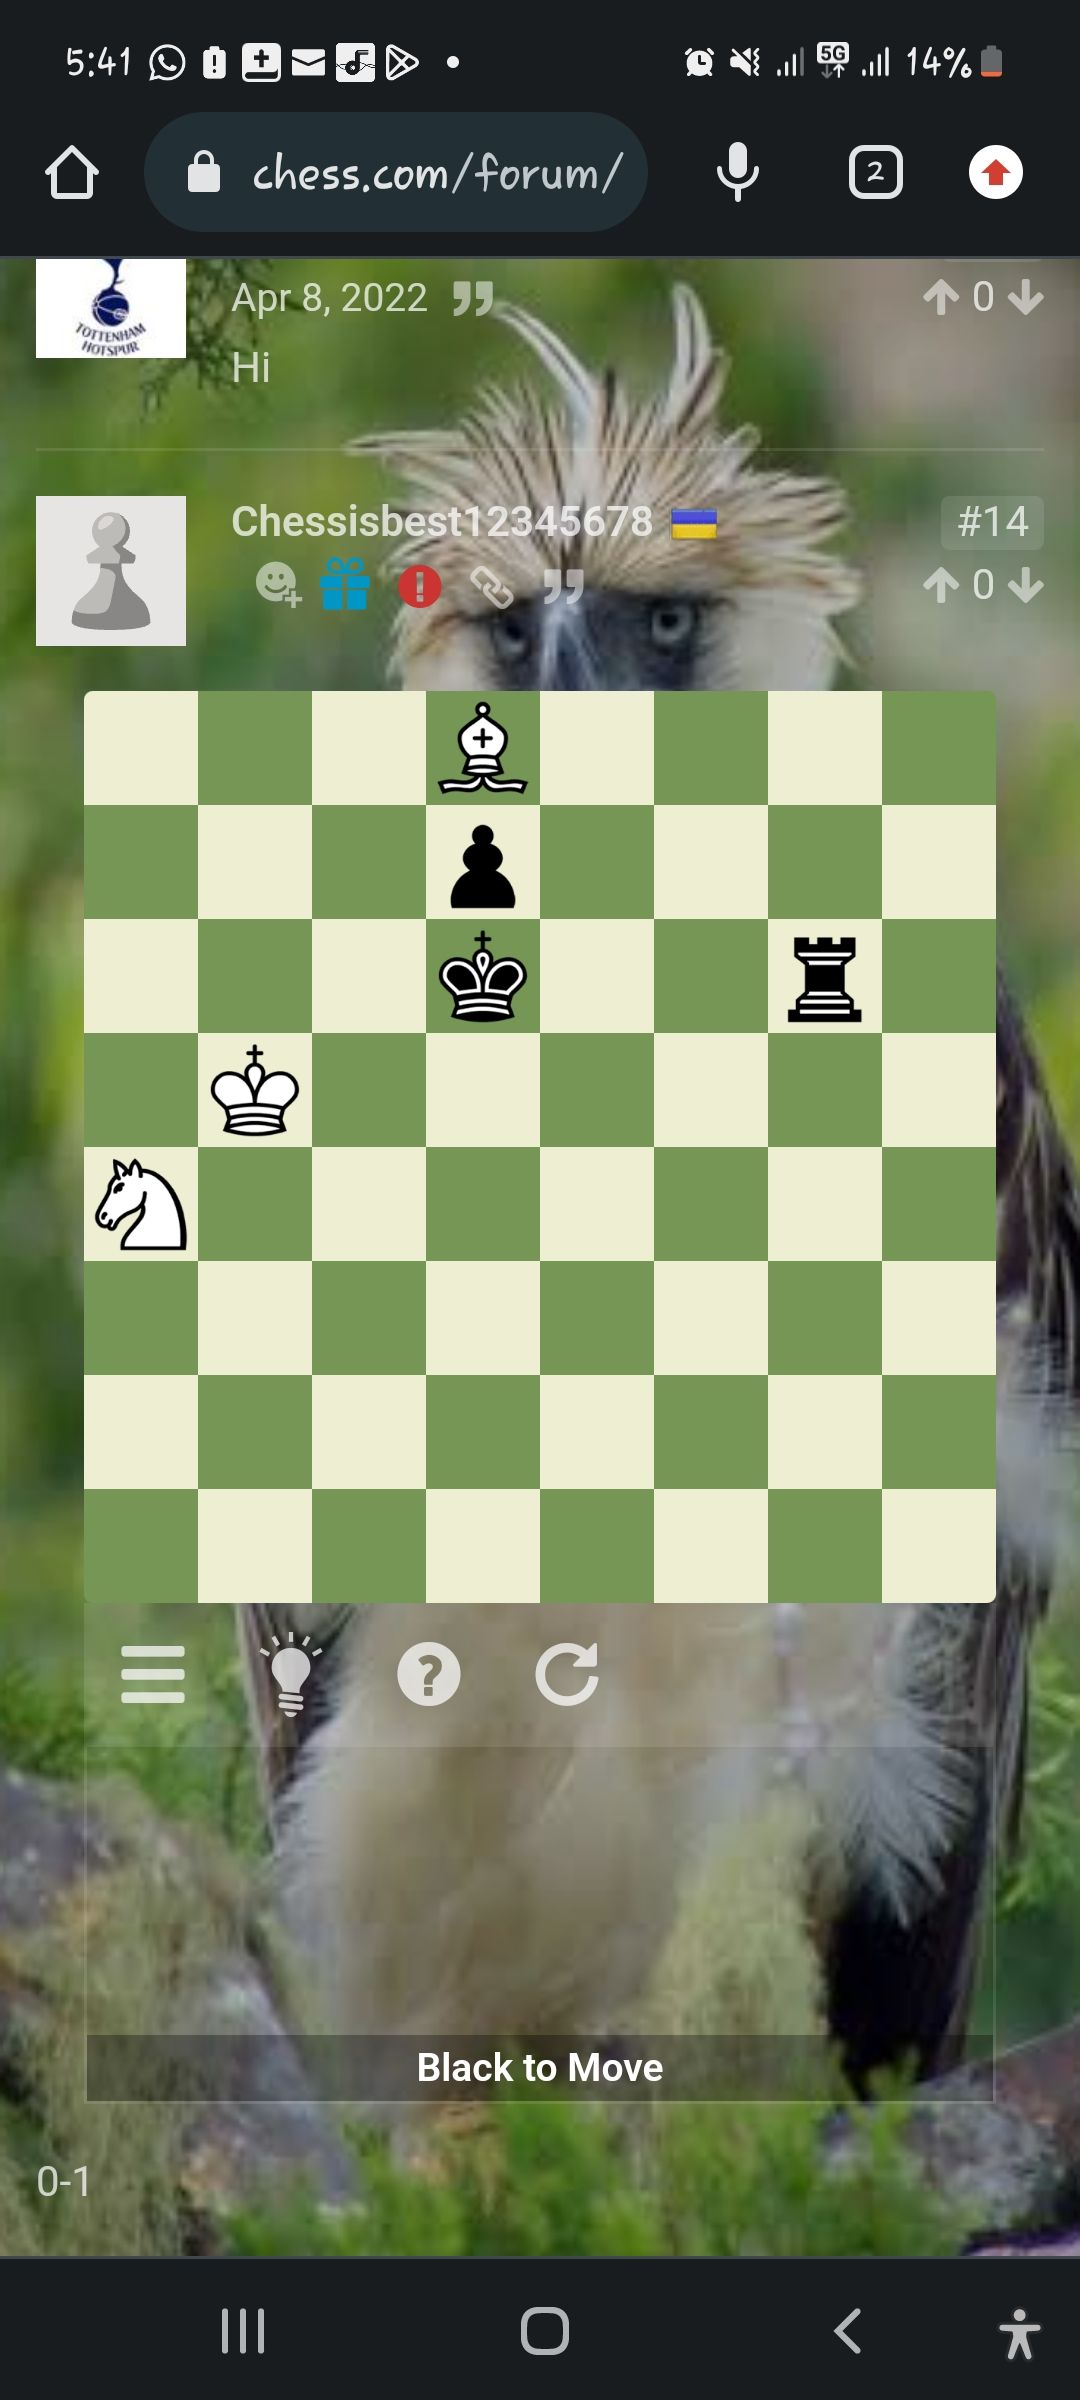 Can you solve? #chess #ecoachess #puzzle #chesspuzzle